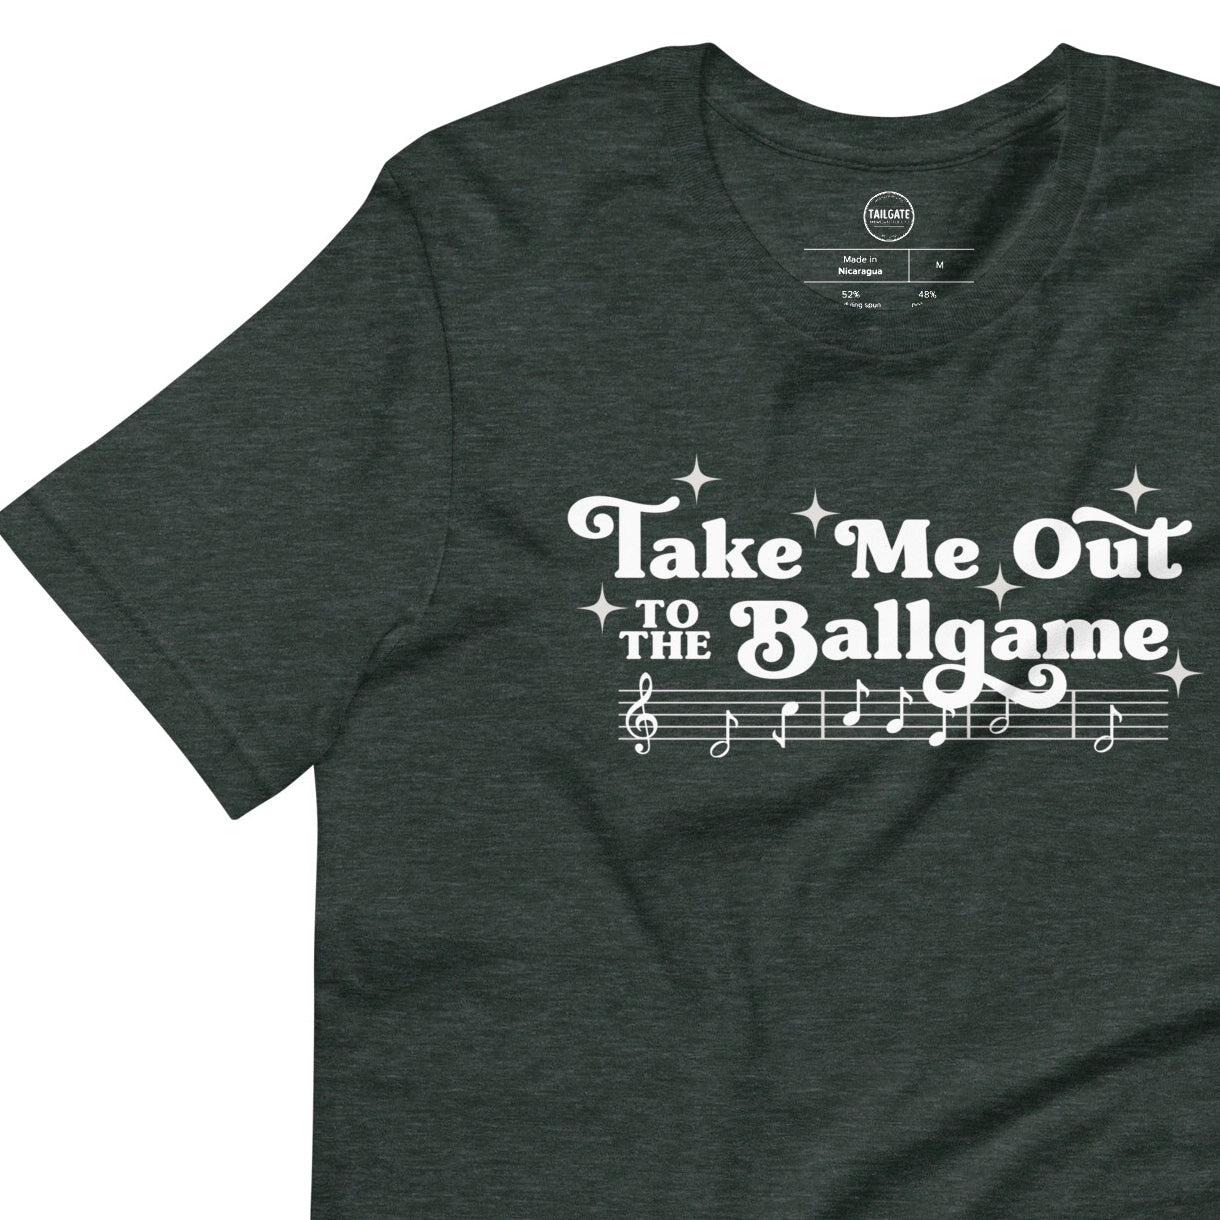 Image of heather emerald green t-shirt with design of "Take Me Out to the Ballgame" with coordinating musical notes in white located on centre chest. This design is exclusive to Tailgate Mercantile and available only online.